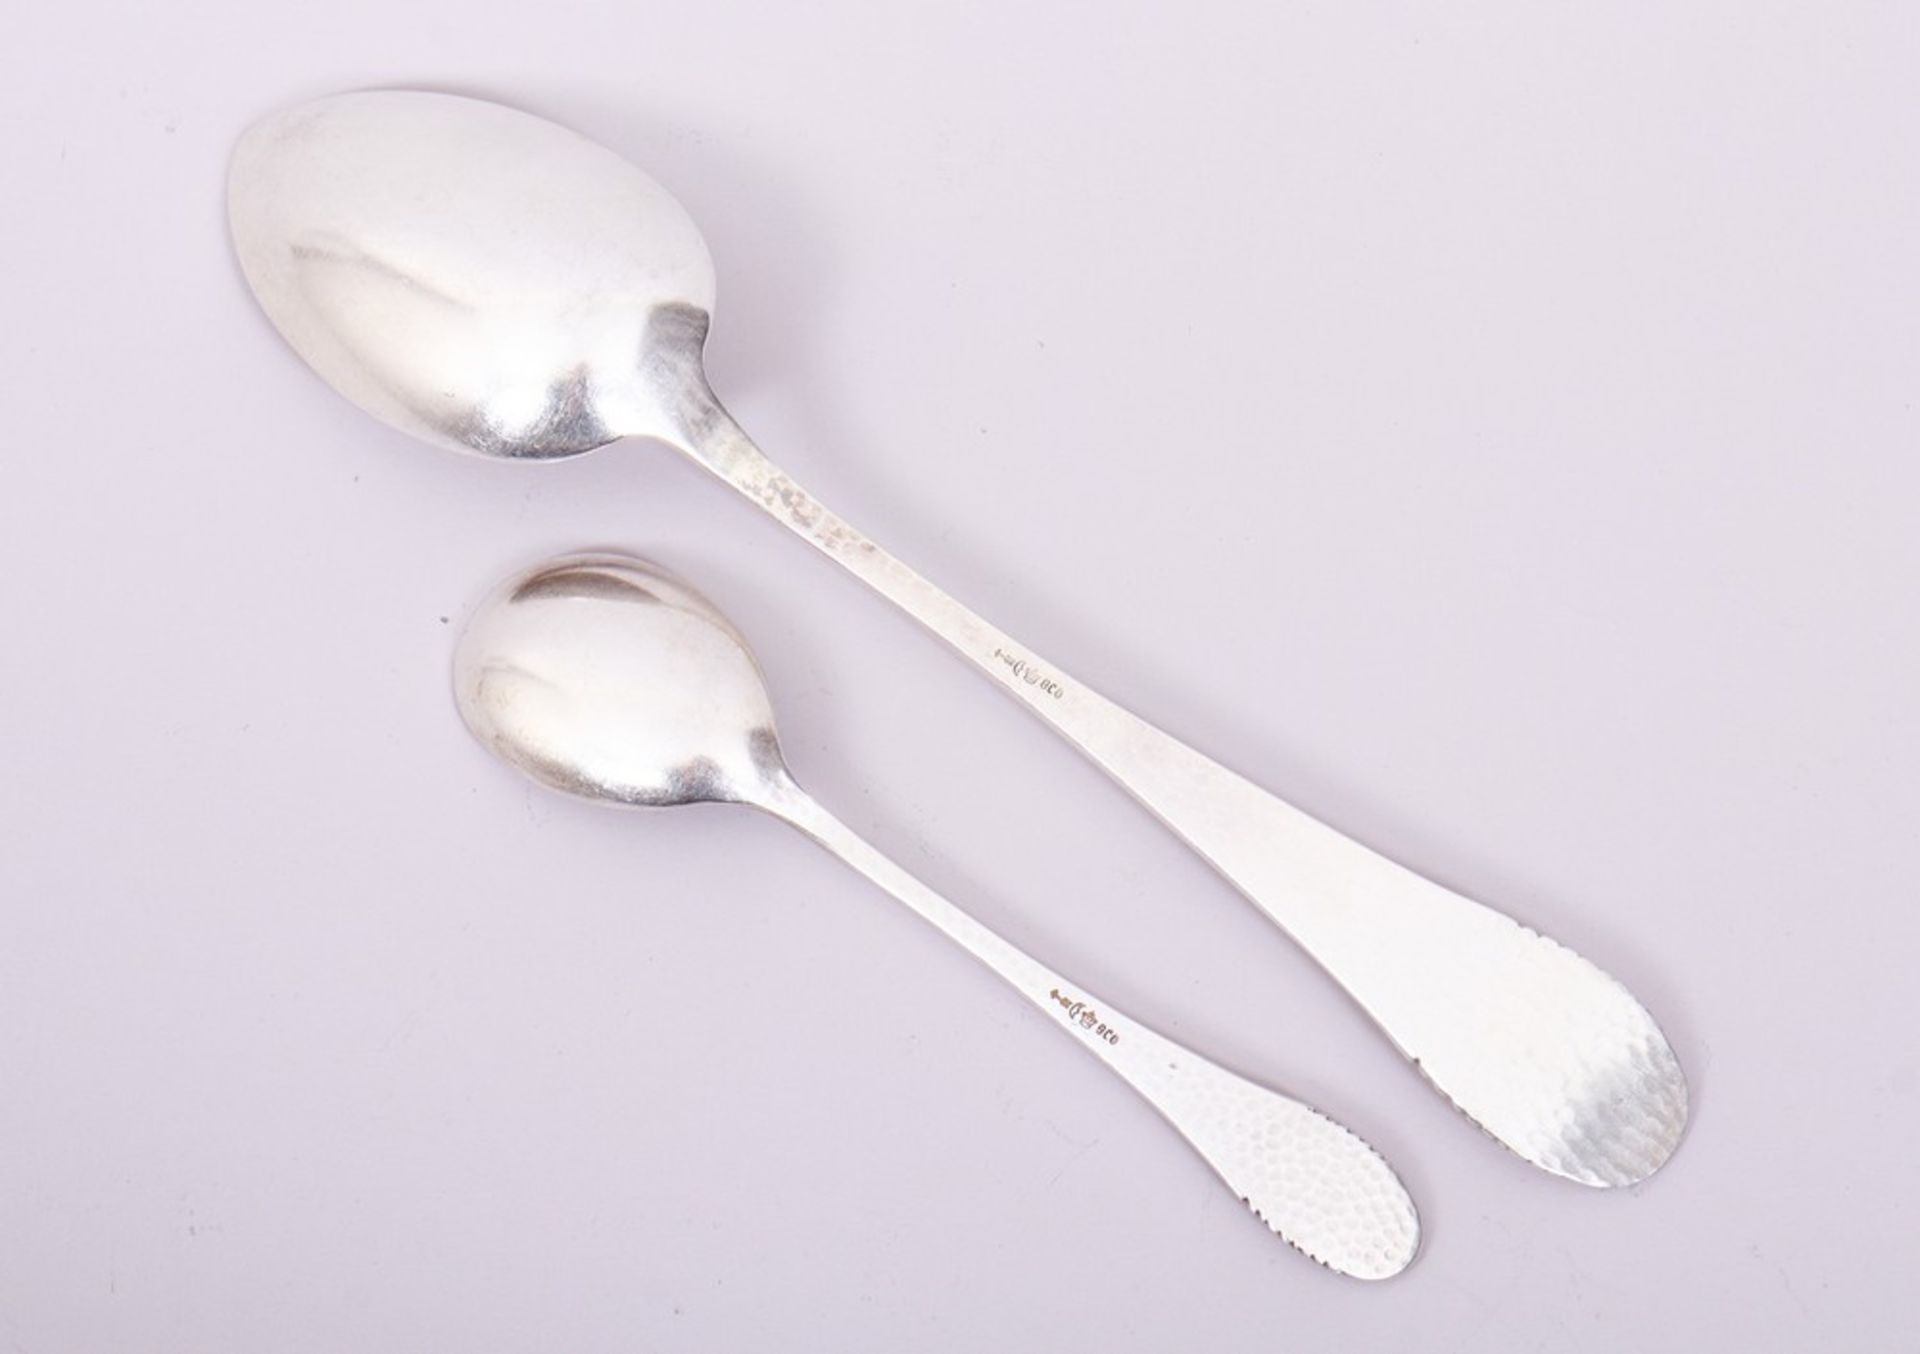 Cutlery for 6 people, 800 silver, Robbe & Berking, Flensburg, 1st half 20th C., 24 pieces - Image 9 of 9